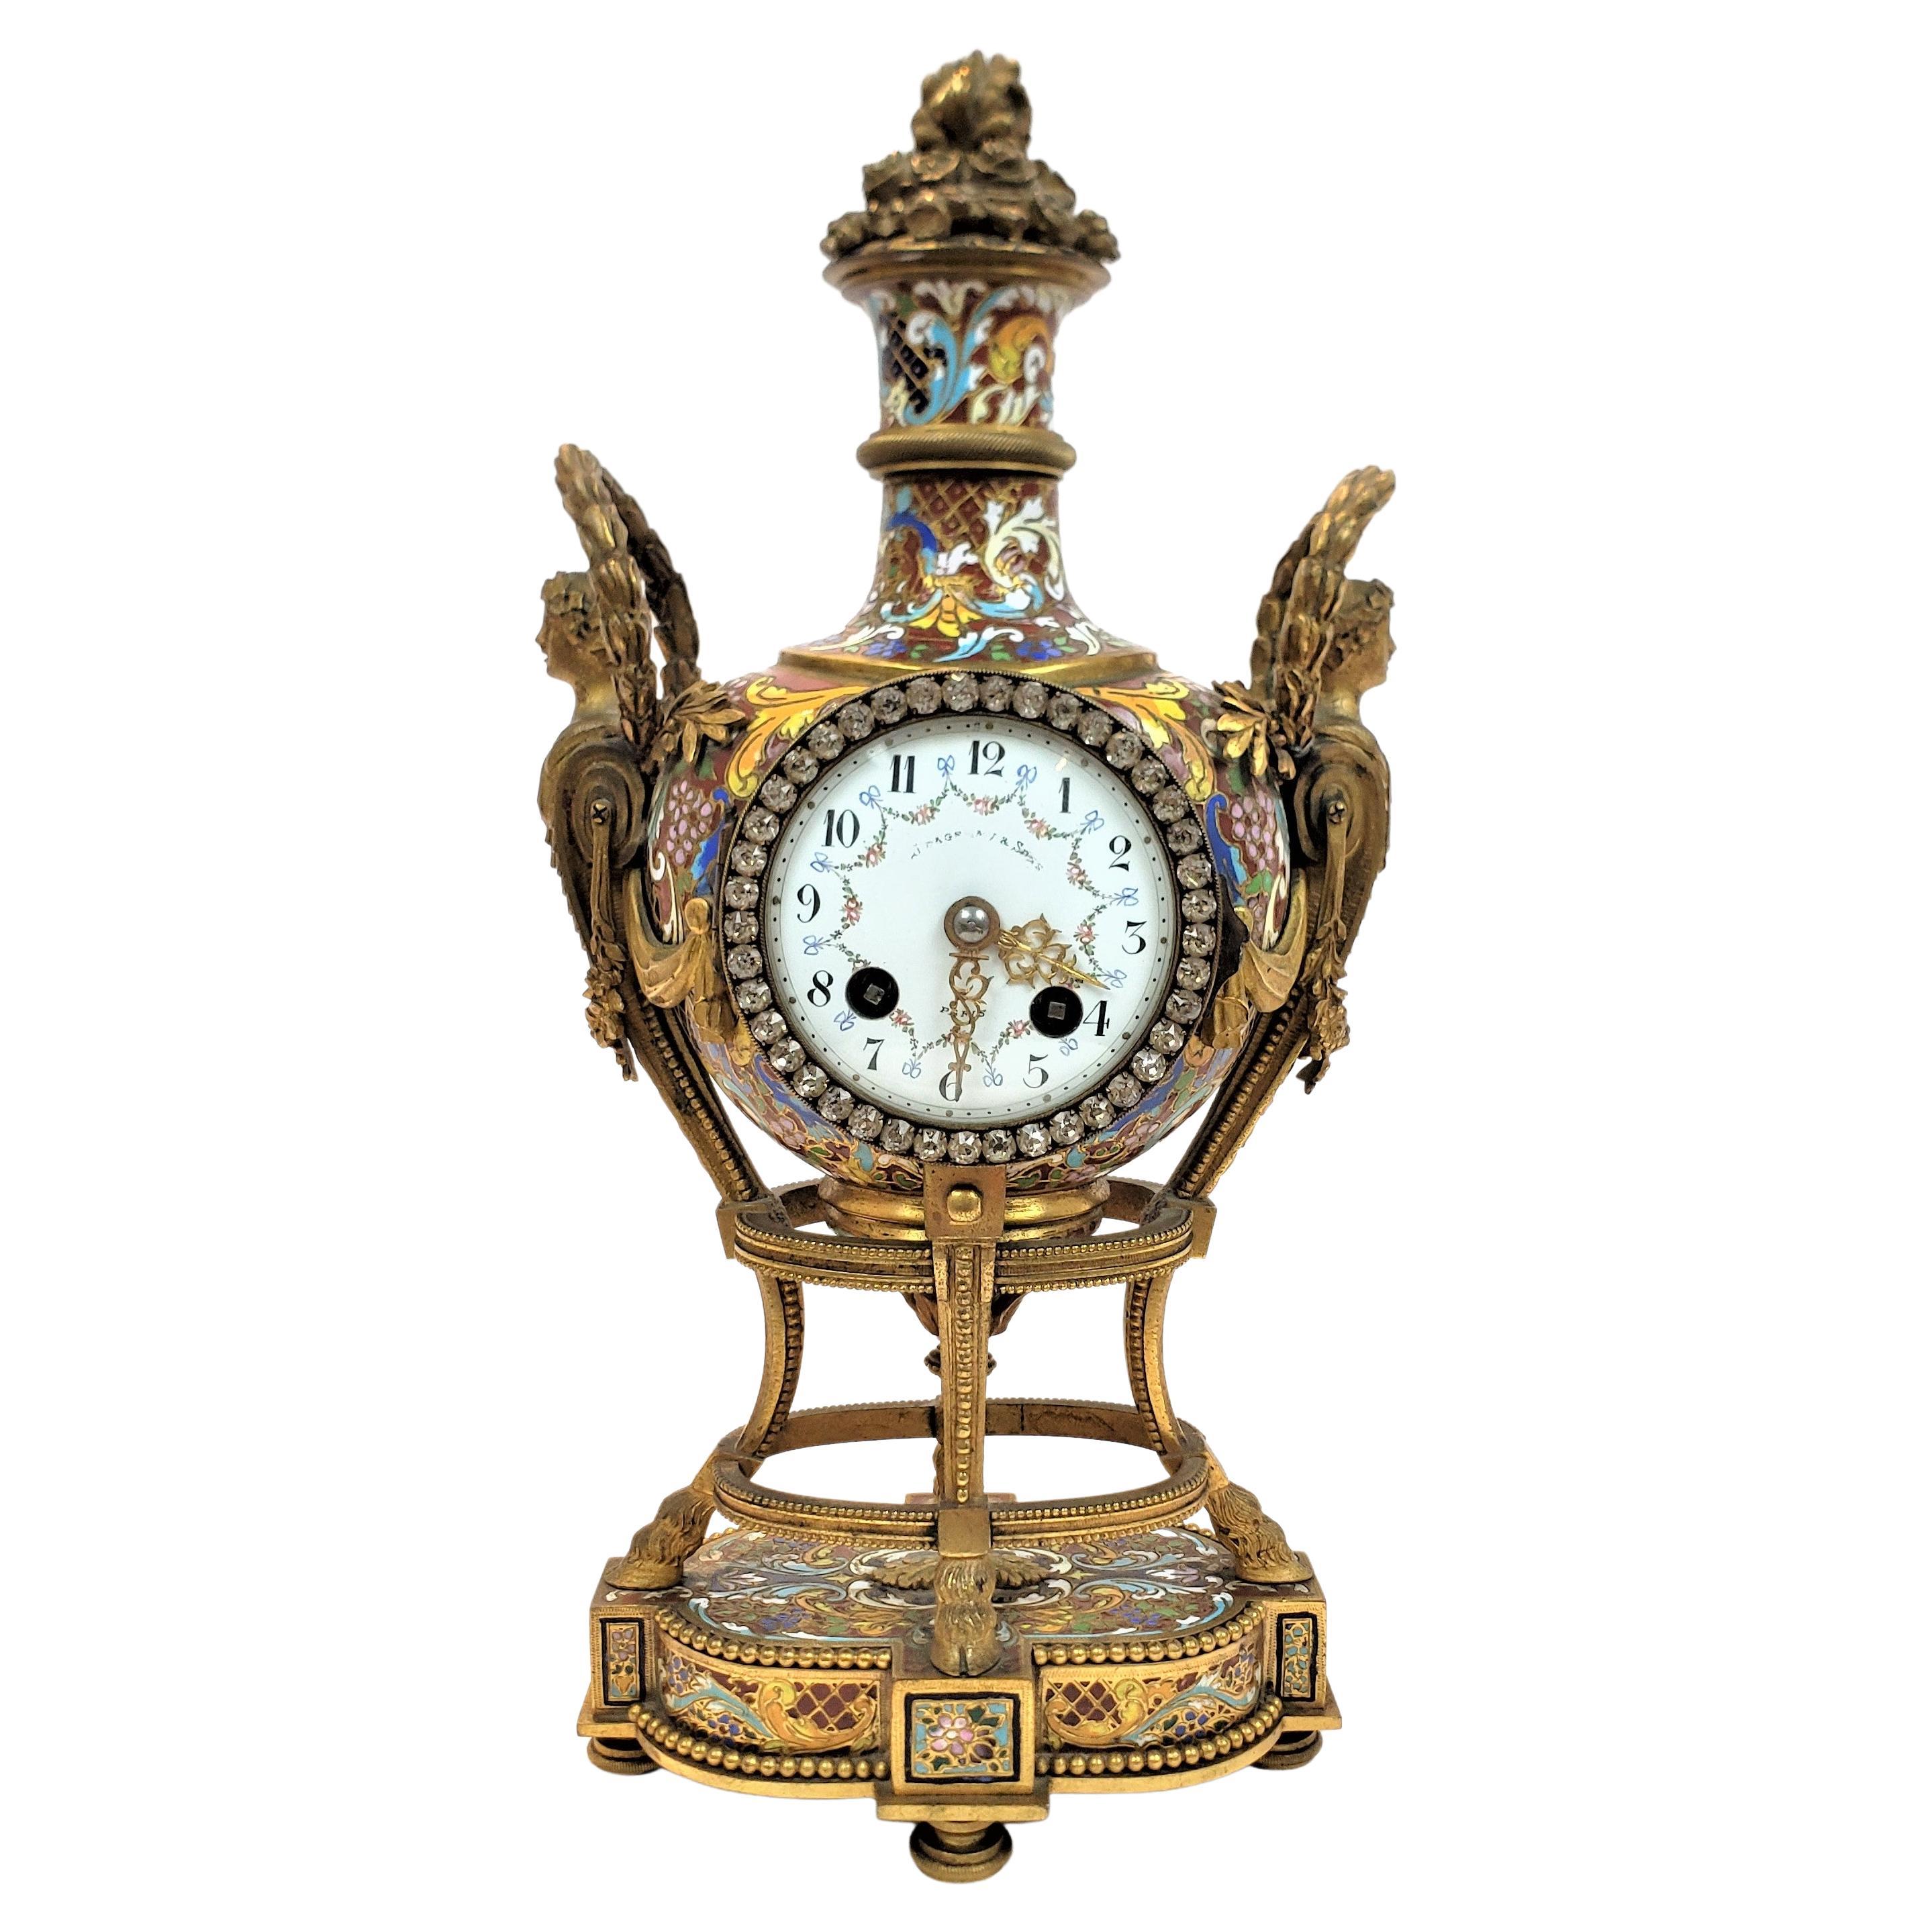 Antique French Gilt Bronze & Champleve 'Marie Antoinette' Mantel or Table Clock